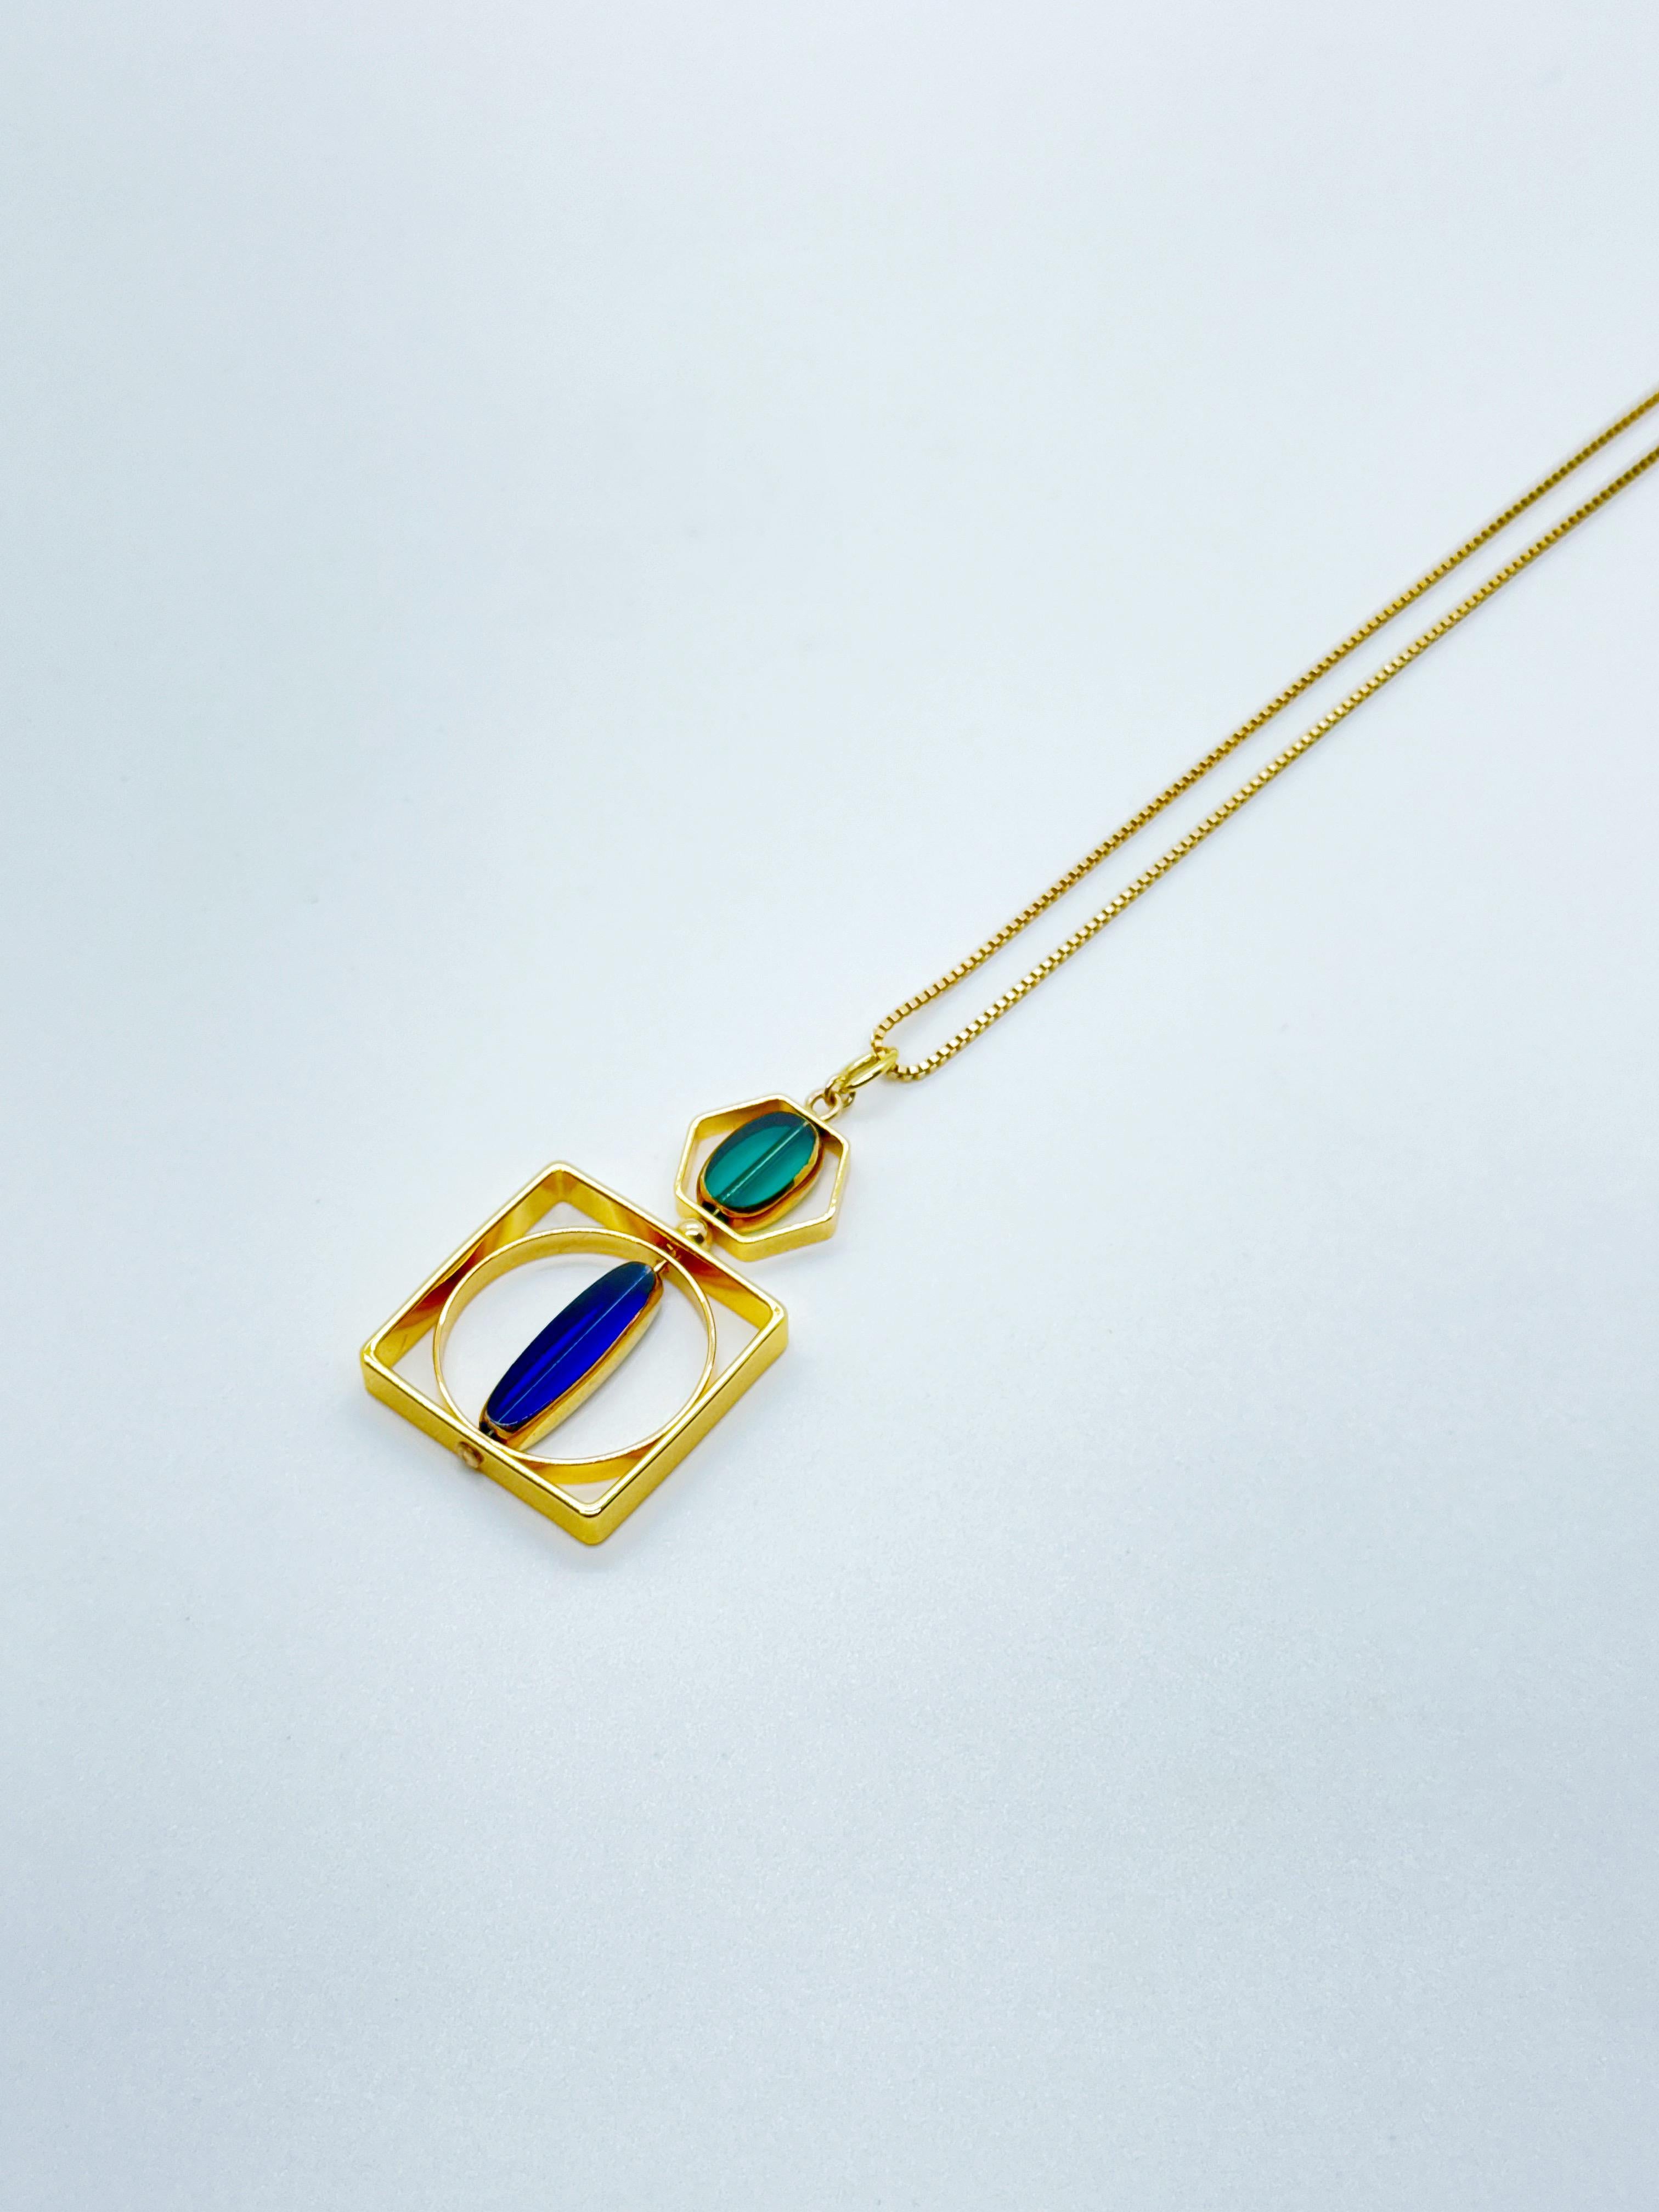 The pendant consists of translucent blue and green vintage German glass beads and is finished with a 20-inch gold-filled chain. 

The beads are new old stock vintage German glass beads that are framed with 24K gold. The beads were hand-pressed